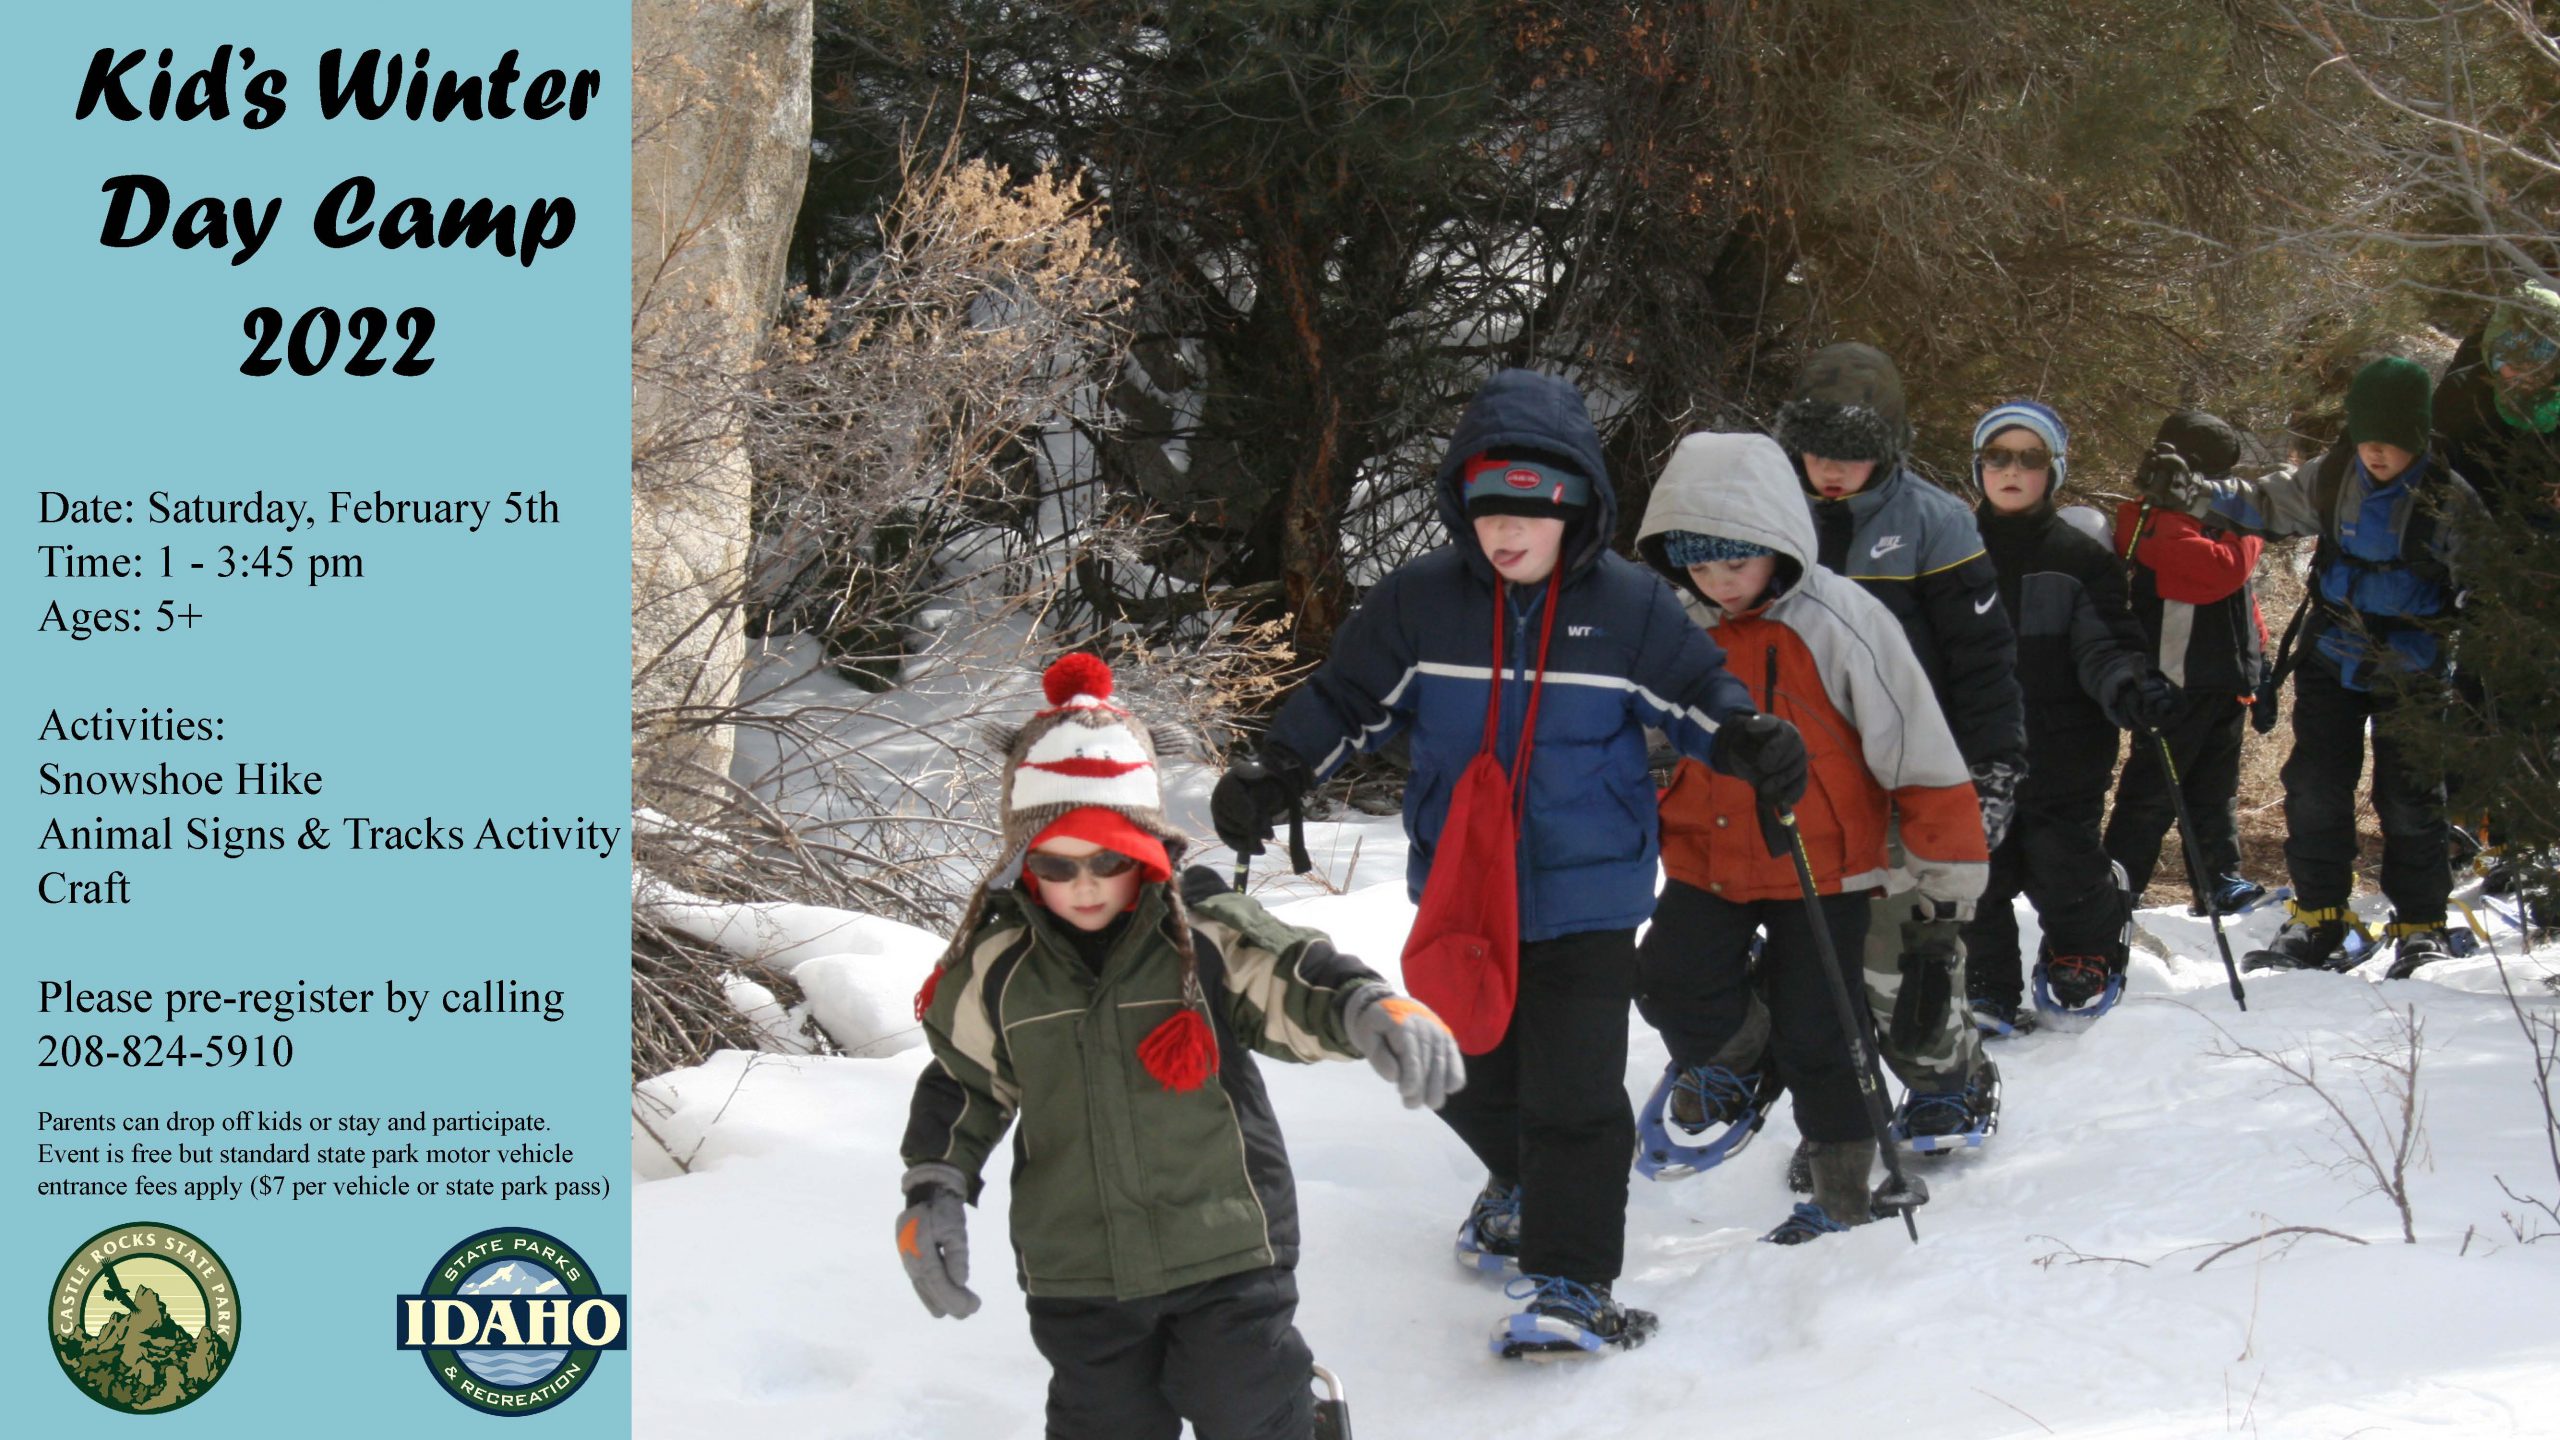 Date: Saturday, February 5th Time: 1 - 3:45 pm Ages: 5+ Activities: Snowshoe Hike Animal Signs & Tracks Activity Craft Please pre-register by calling 208-824-5910 Parents can drop off kids or stay and participate. Event is free but standard state park motor vehicle entrance fees apply ($7 per vehicle or state park pass)